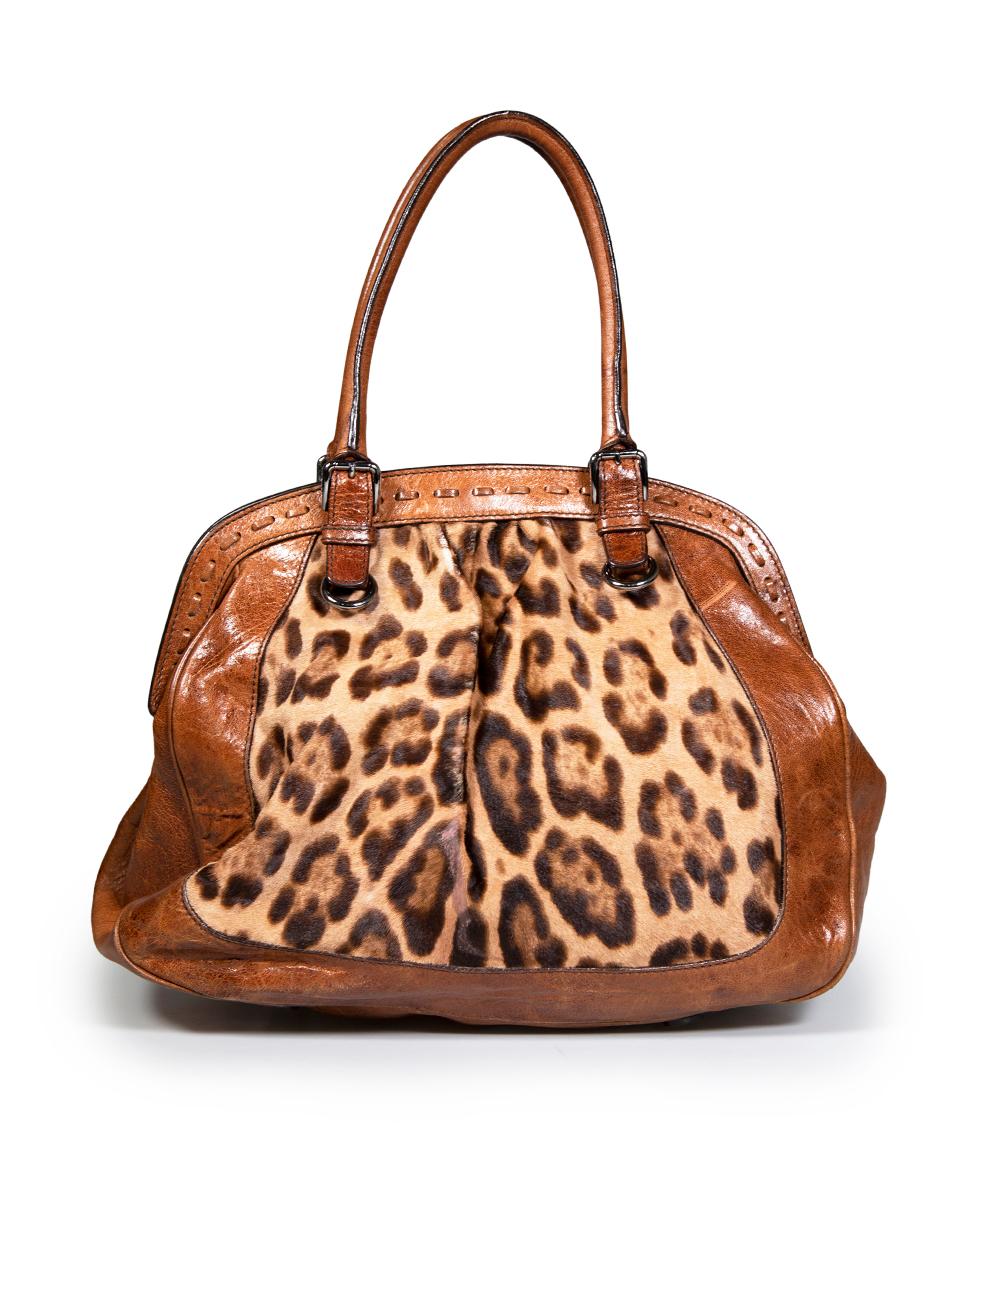 Dolce & Gabbana Miss Romantique Leopard Pony Hair Shoulder Bag In Good Condition For Sale In London, GB